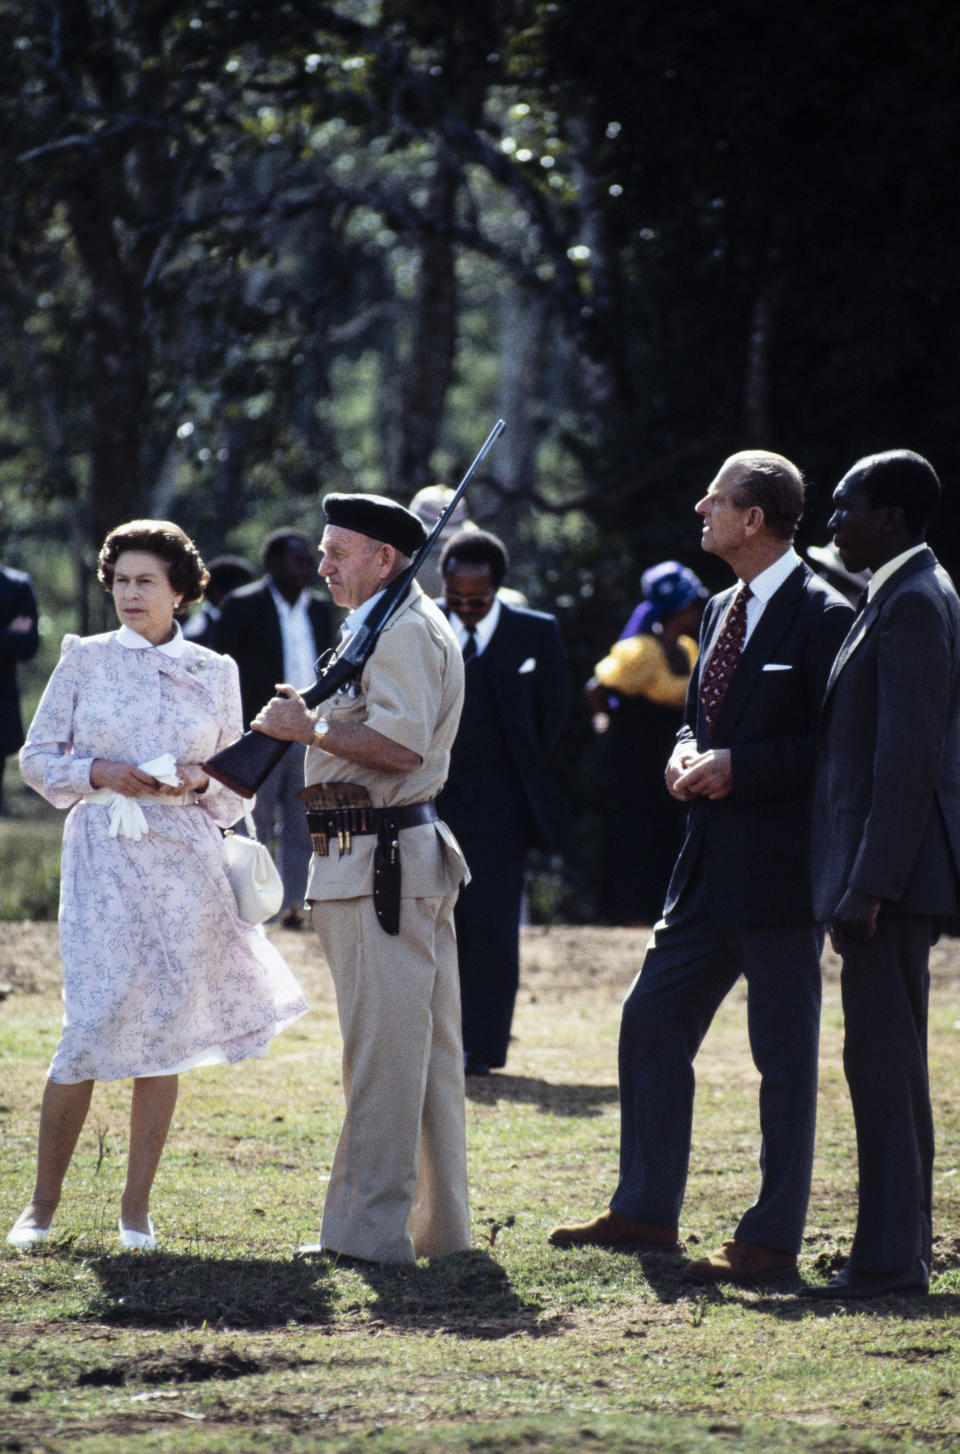 NAIROBI - NOVEMBER 13: Queen Elizabeth II and Prince Philip are shown around the 'Treetops' hotel by Richard Prickett on November 13, 1983 near Sagana in Kenya. It was thirty two years beforehand that the Queen had been staying at 'Treetops' when she learnt of her father's death and that she had become monarch. This return was a part of a 'Royal Tour' of Kenya. (Photo by David Levenson/Getty Images)